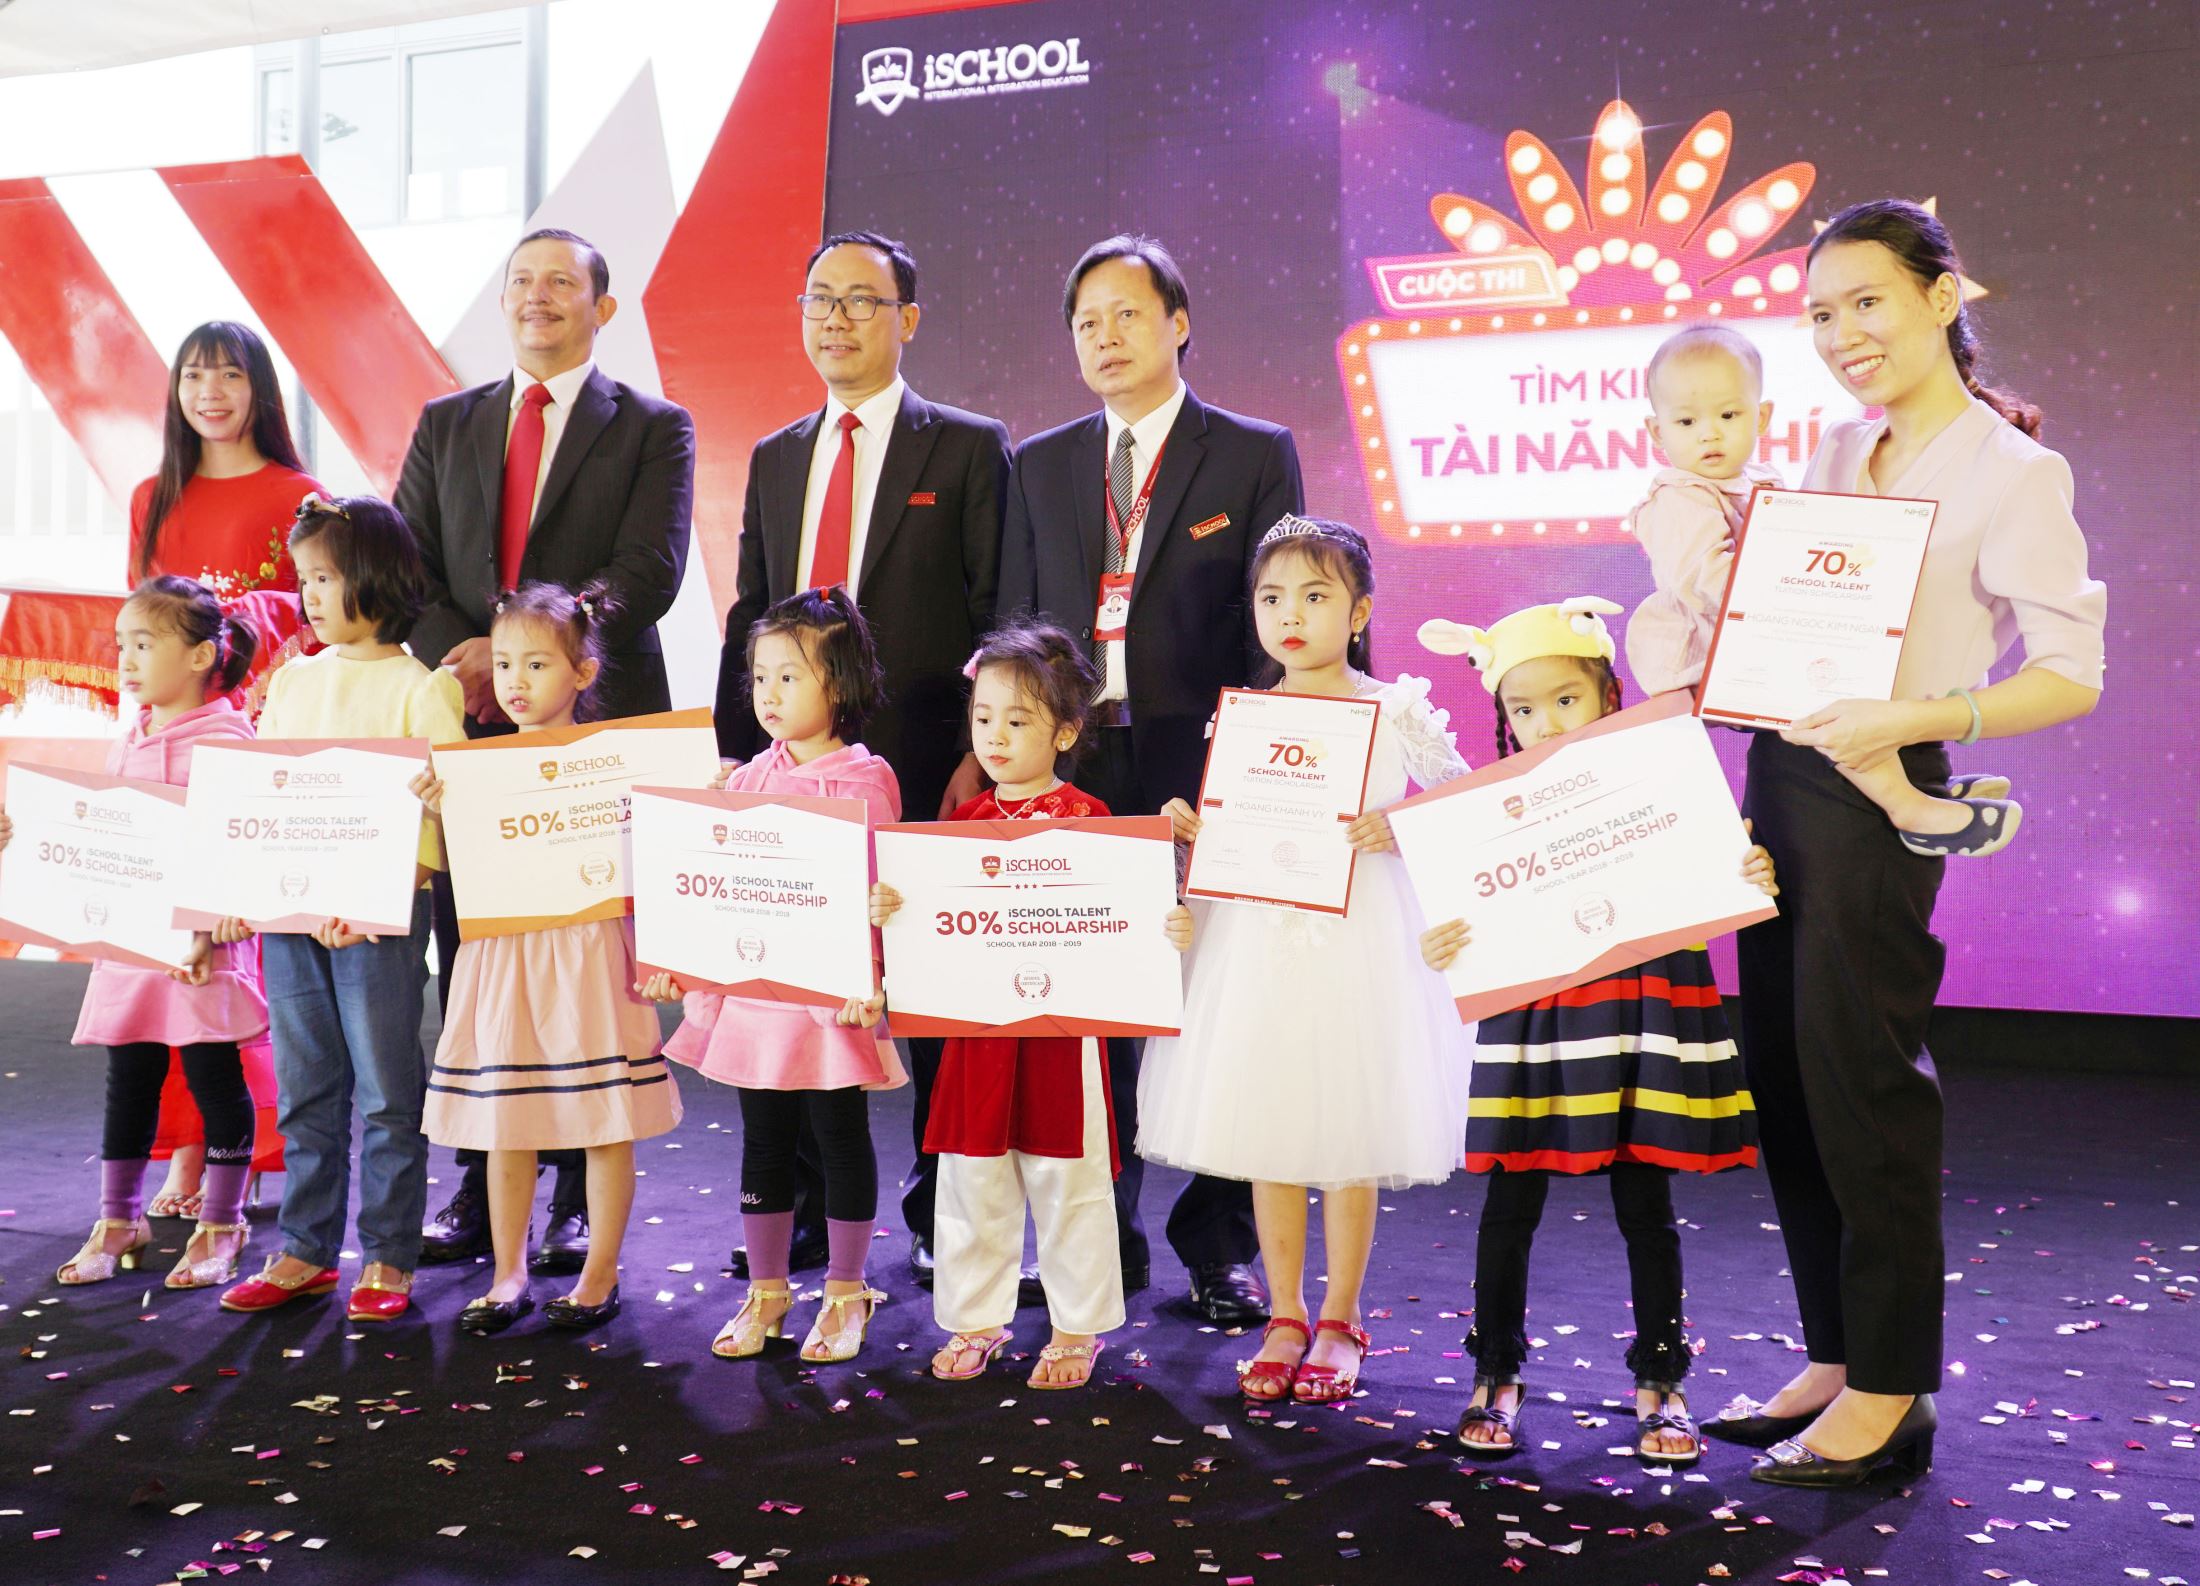 Also in the event, iSchool rewarded scholarships to children talents of Quang Tri province in the contest “iTalent – Finding the children talents”